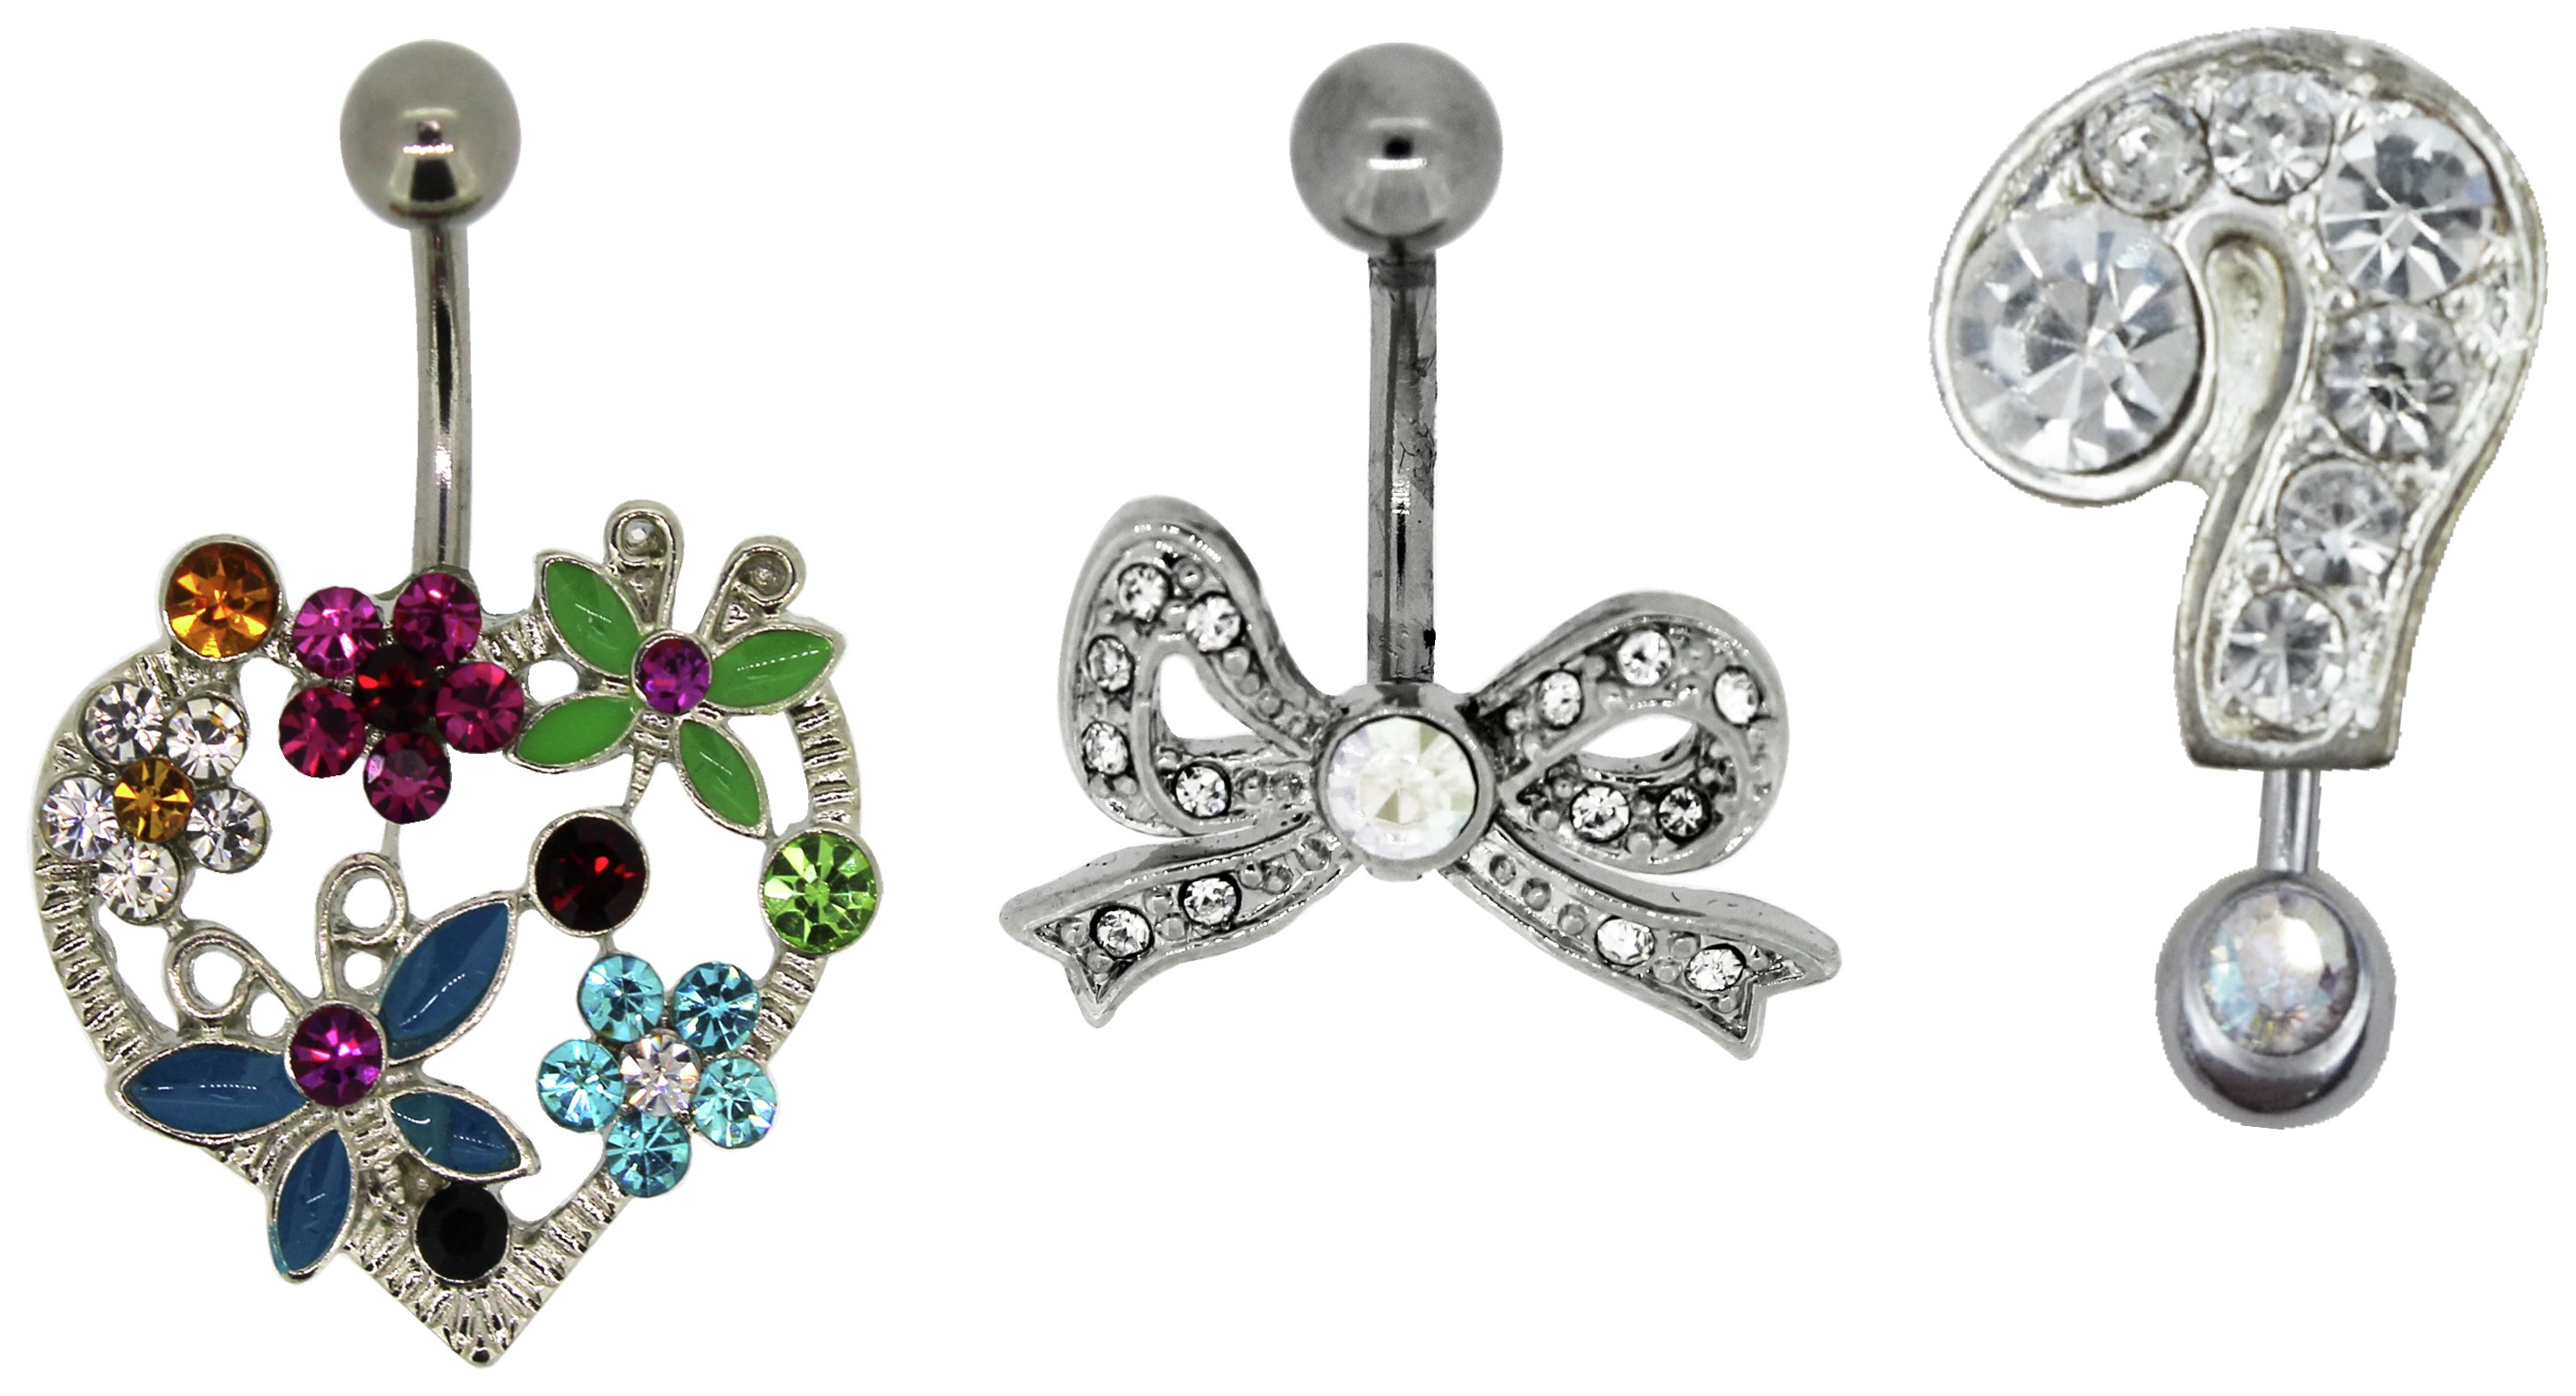 Link Up S.Steel Heart, Bow, Question Mark Crystal Belly Bars